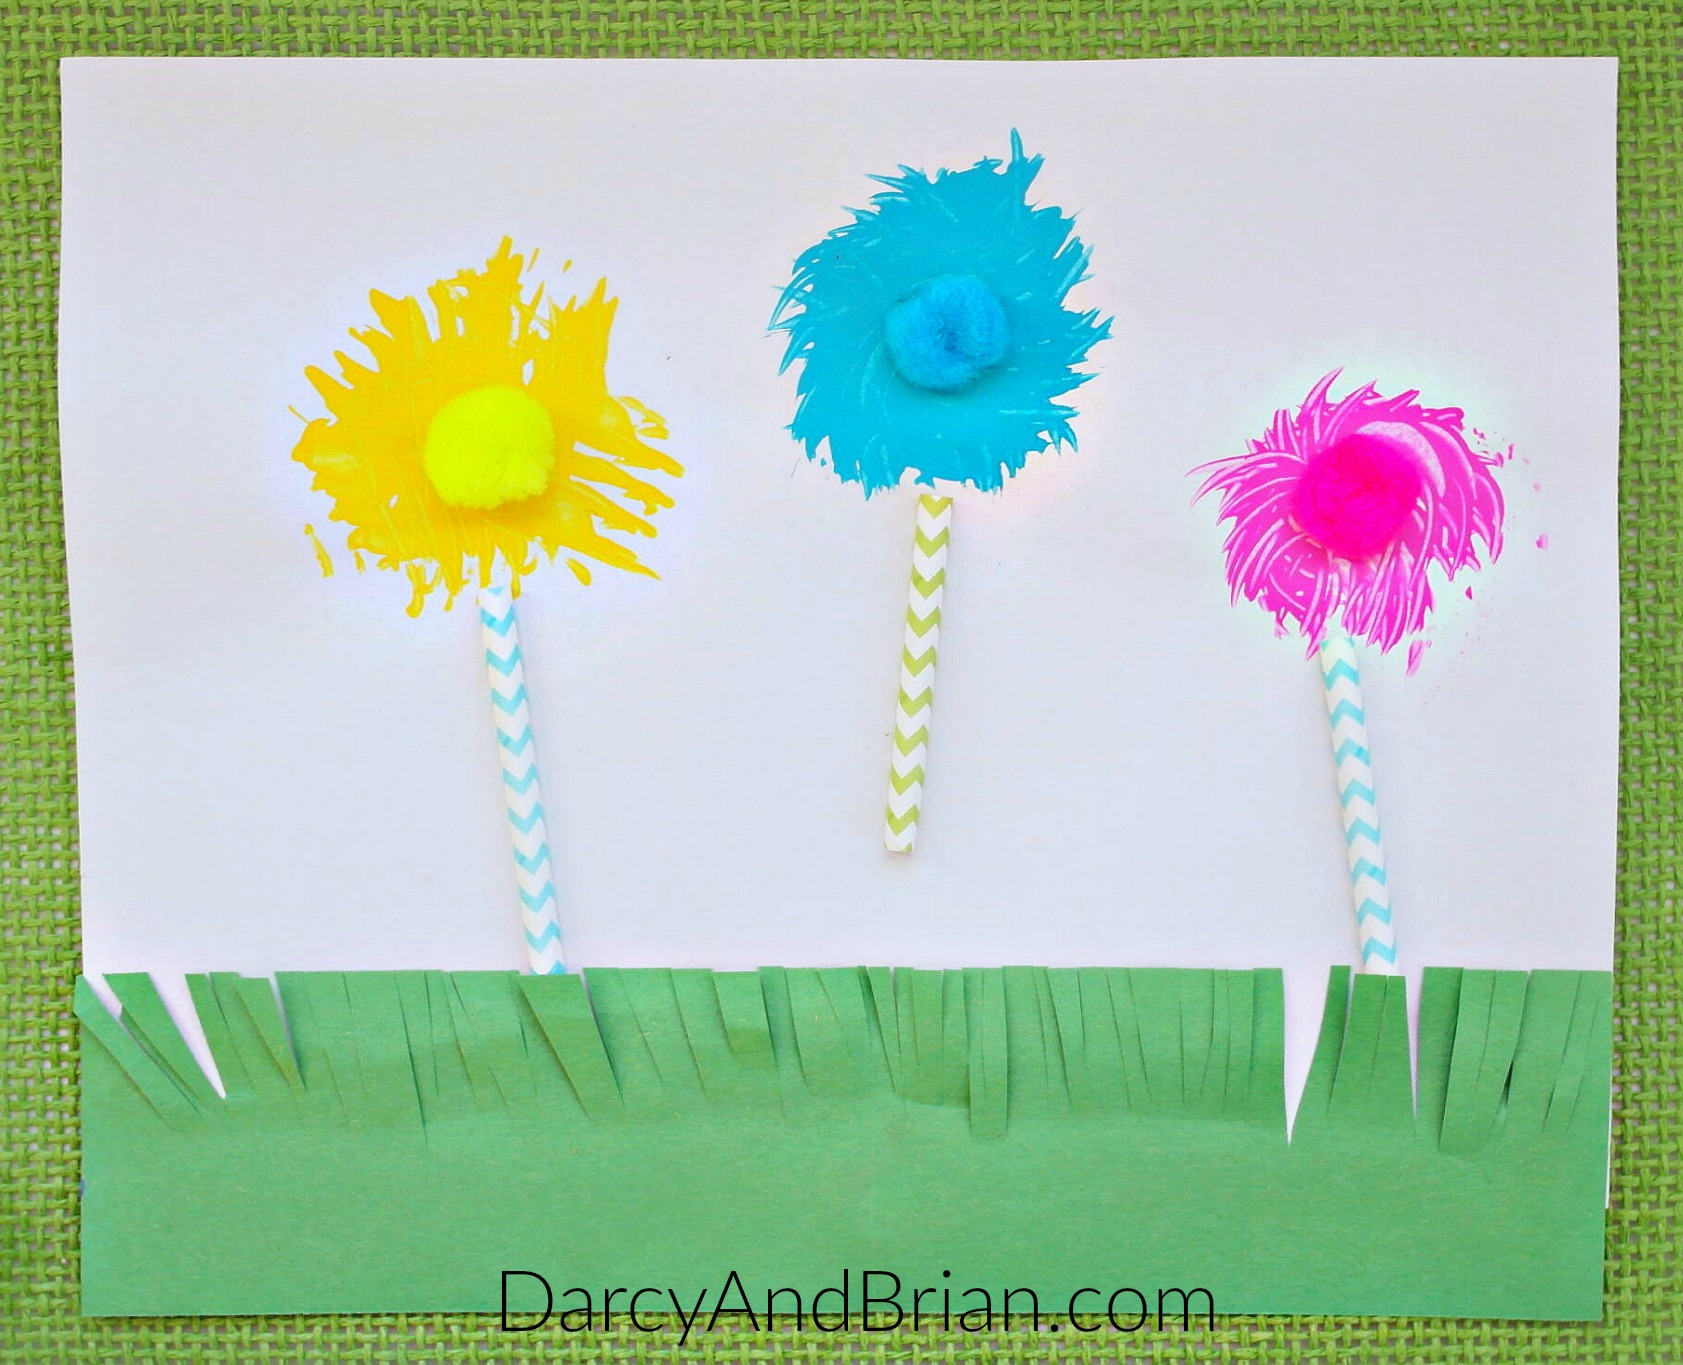 Toddlers and preschoolers will have fun painting with forks. These can be flowers for a spring activity or Truffula Trees for little Dr. Seuss fans.